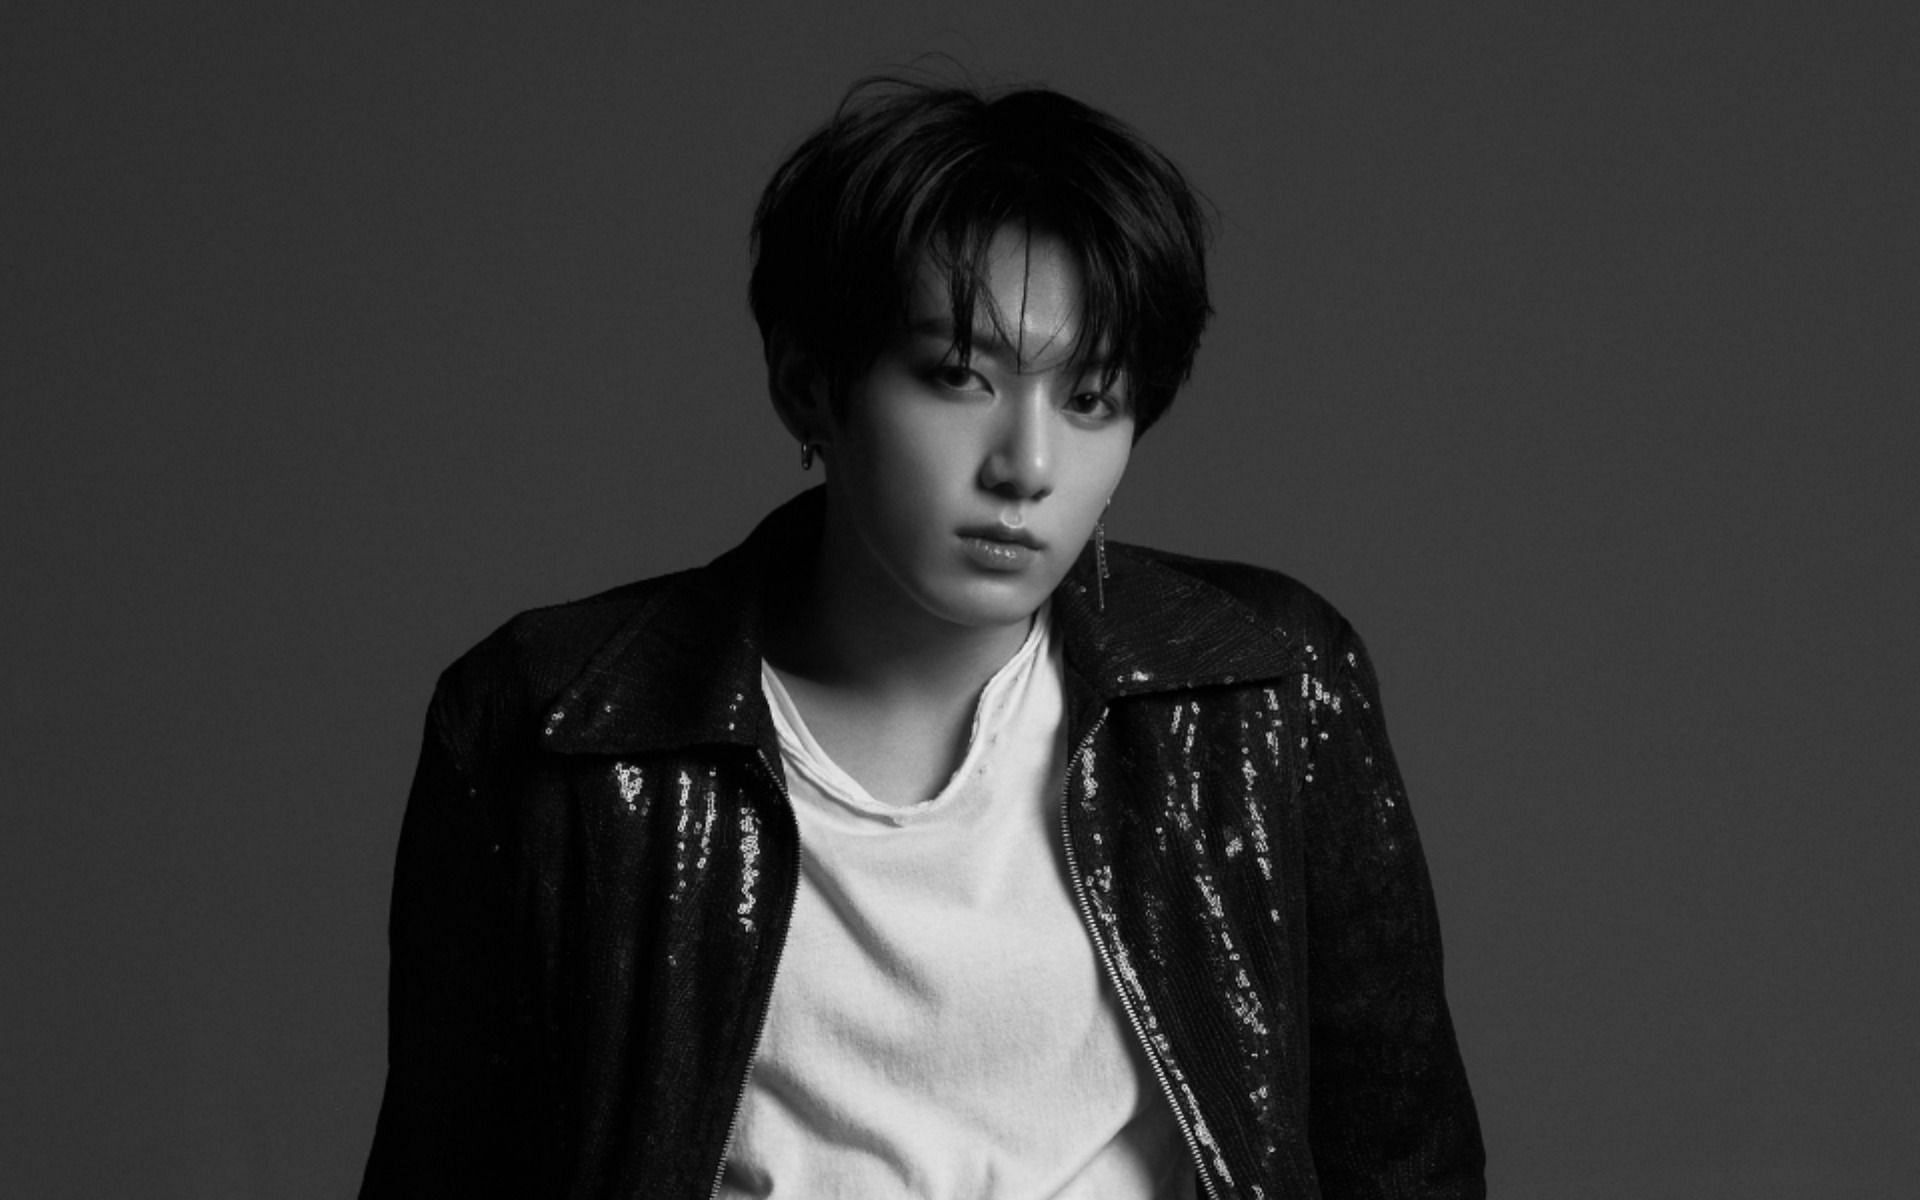 BTS Jungkook creates a brand new record with solo track &quot;Euphoria&quot; (Image via Big Hit Music)